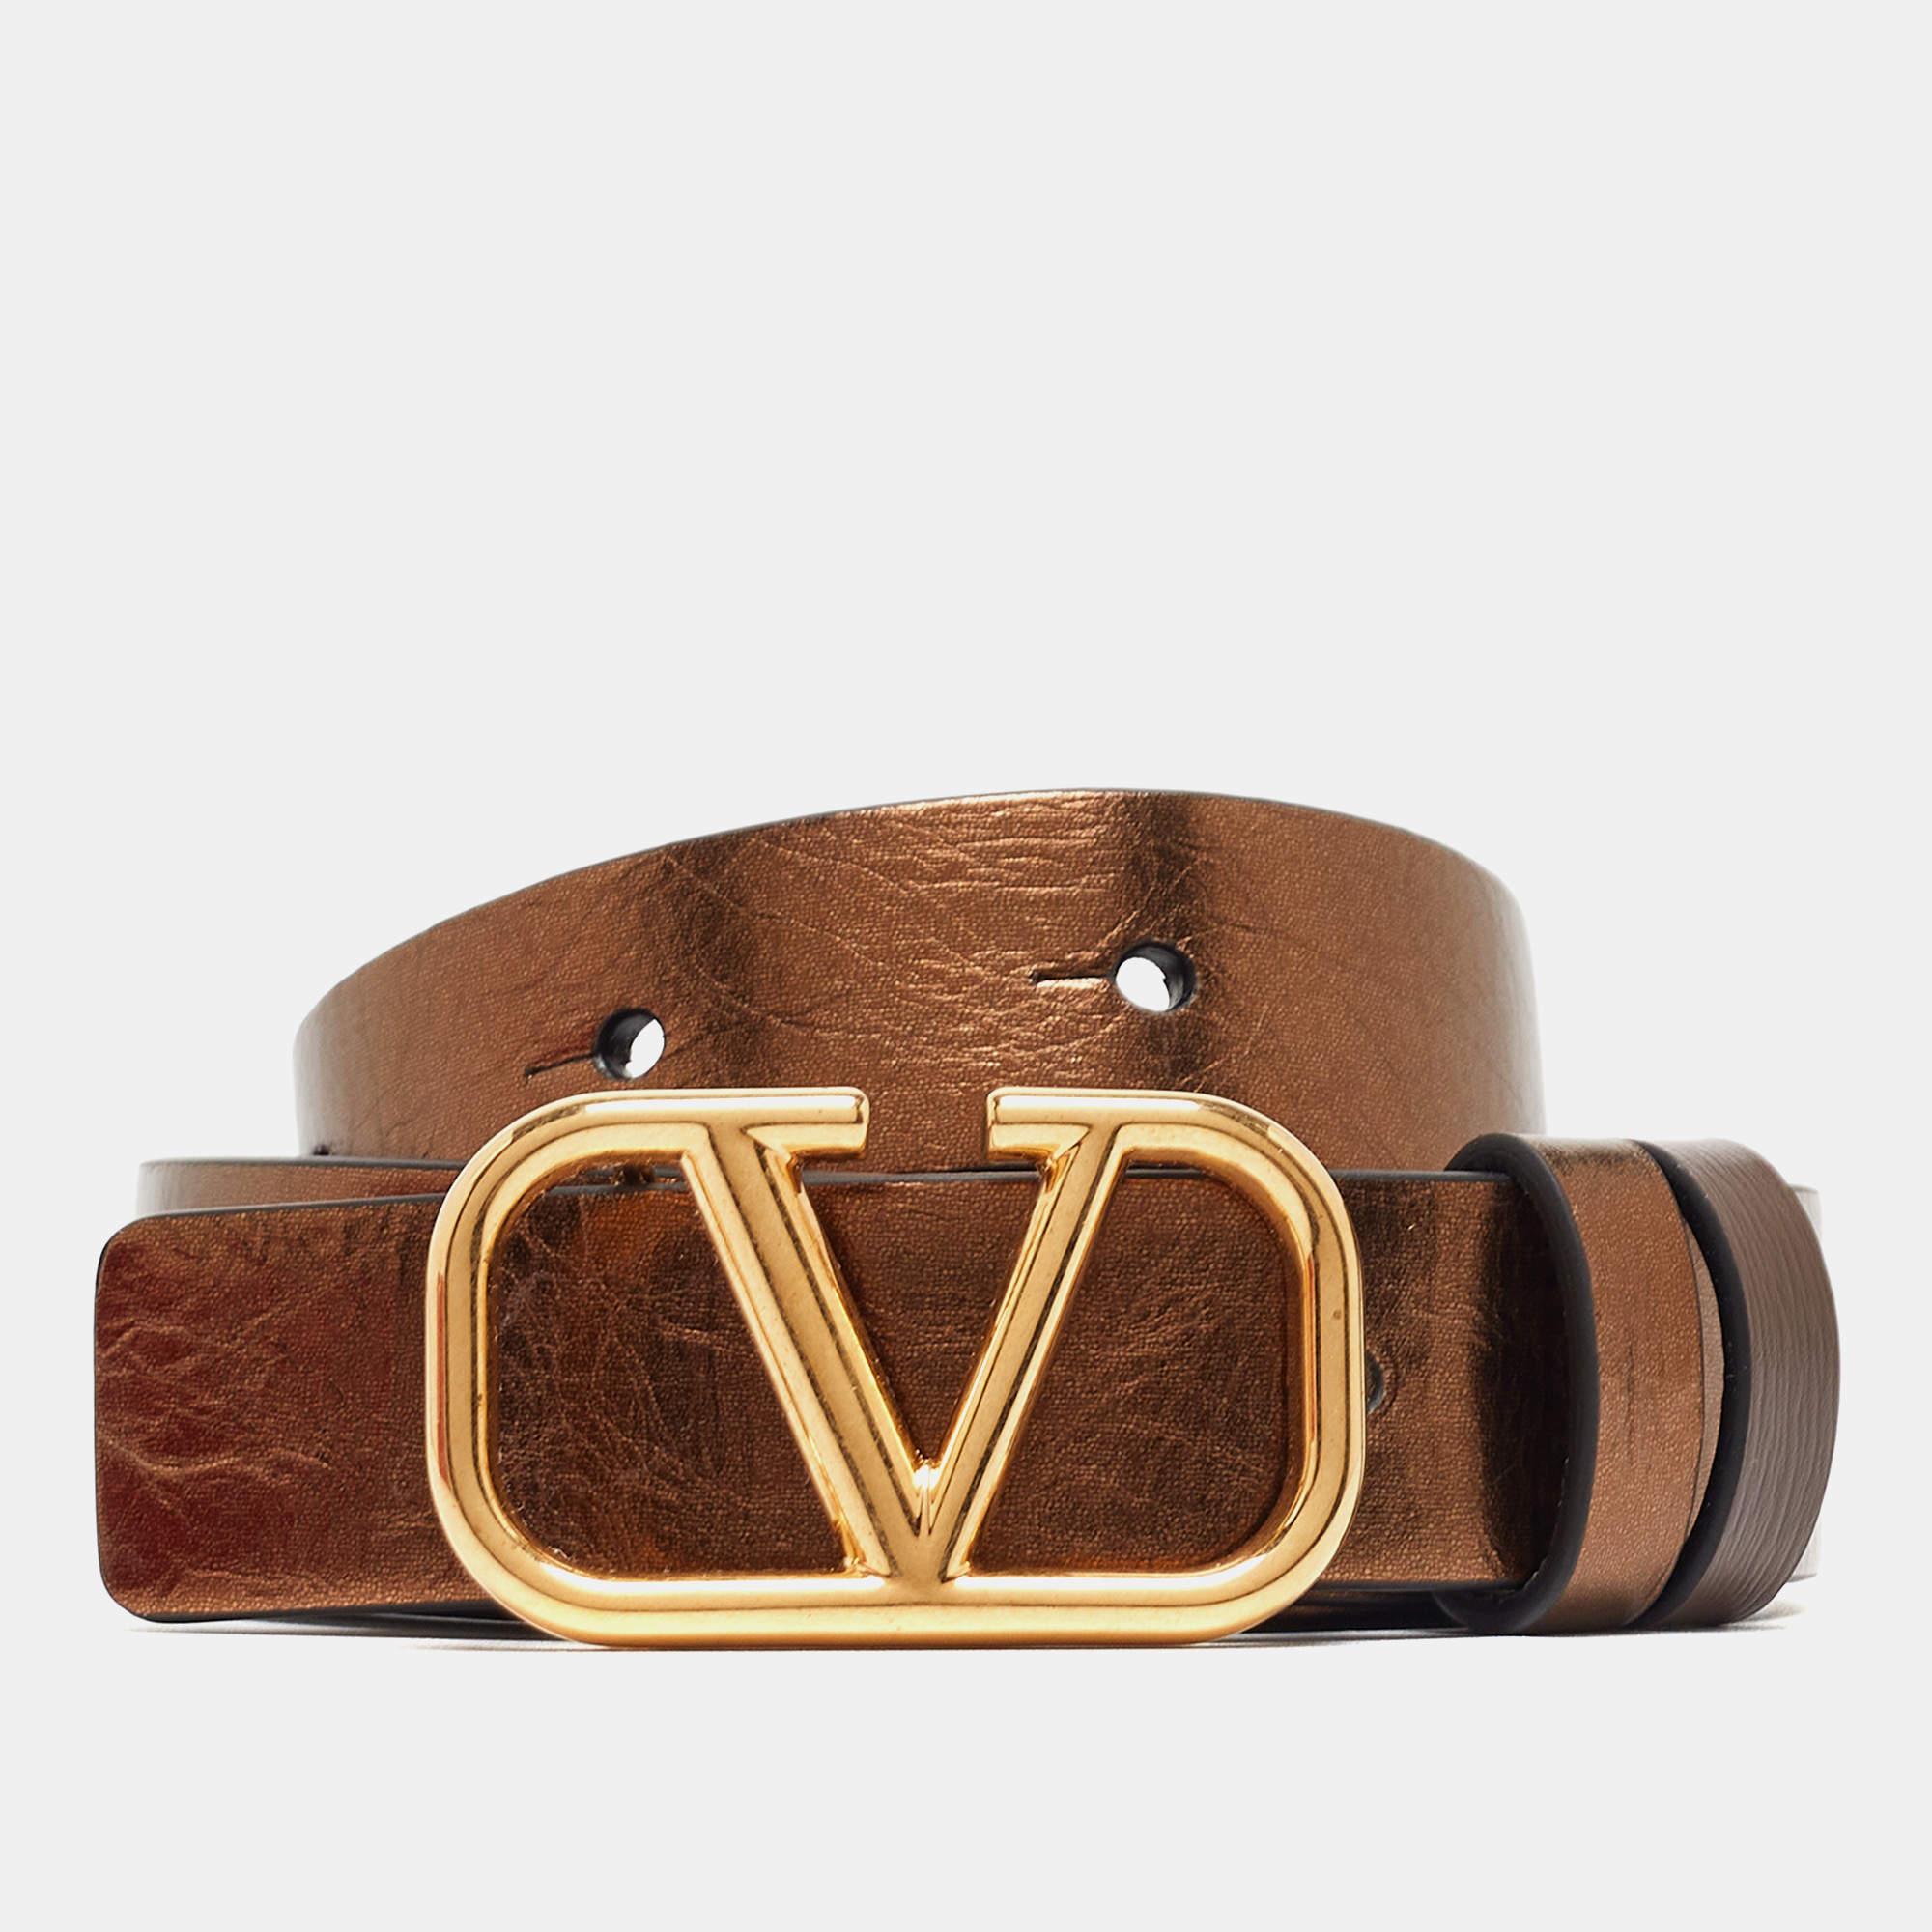 A classic add-on to your collection of belts, this Valentino piece has been crafted from leather. It is reversible with a metallic shade on one side and brown on the other. It is topped with the much-coveted VLogo buckle in gold-tone. This wardrobe